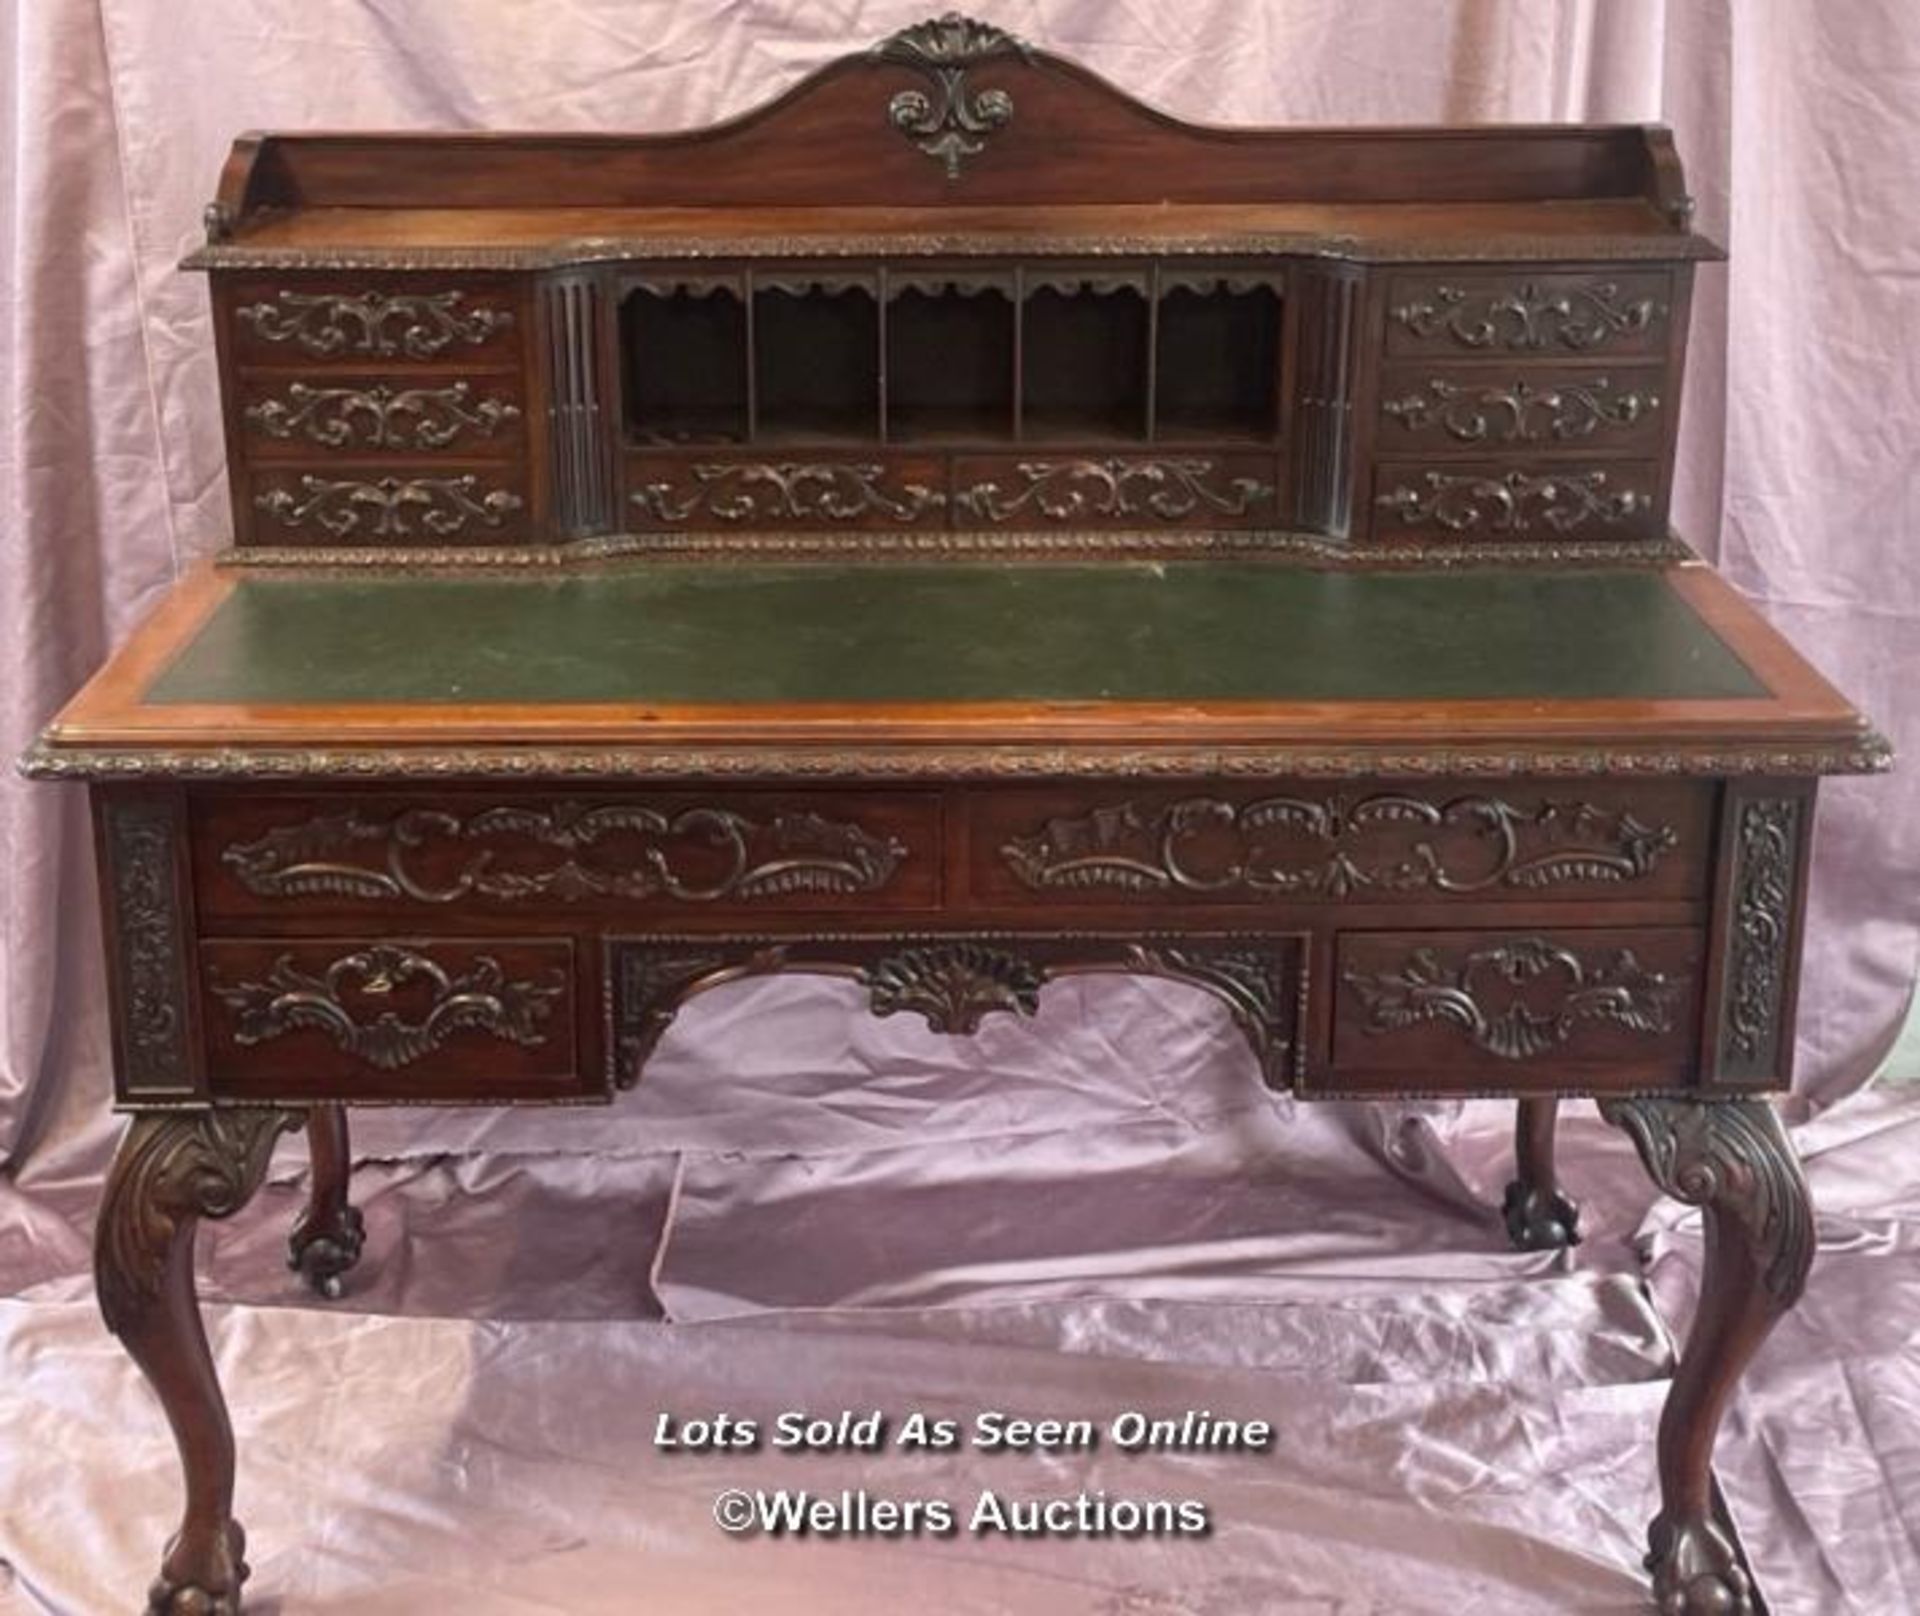 CIRCA 1900, GEOGIAN STYLE HIGHLY DECORATIVE AND CARVED MAHOGANY LINED WRITING DESK WITH LEATHER - Image 10 of 11